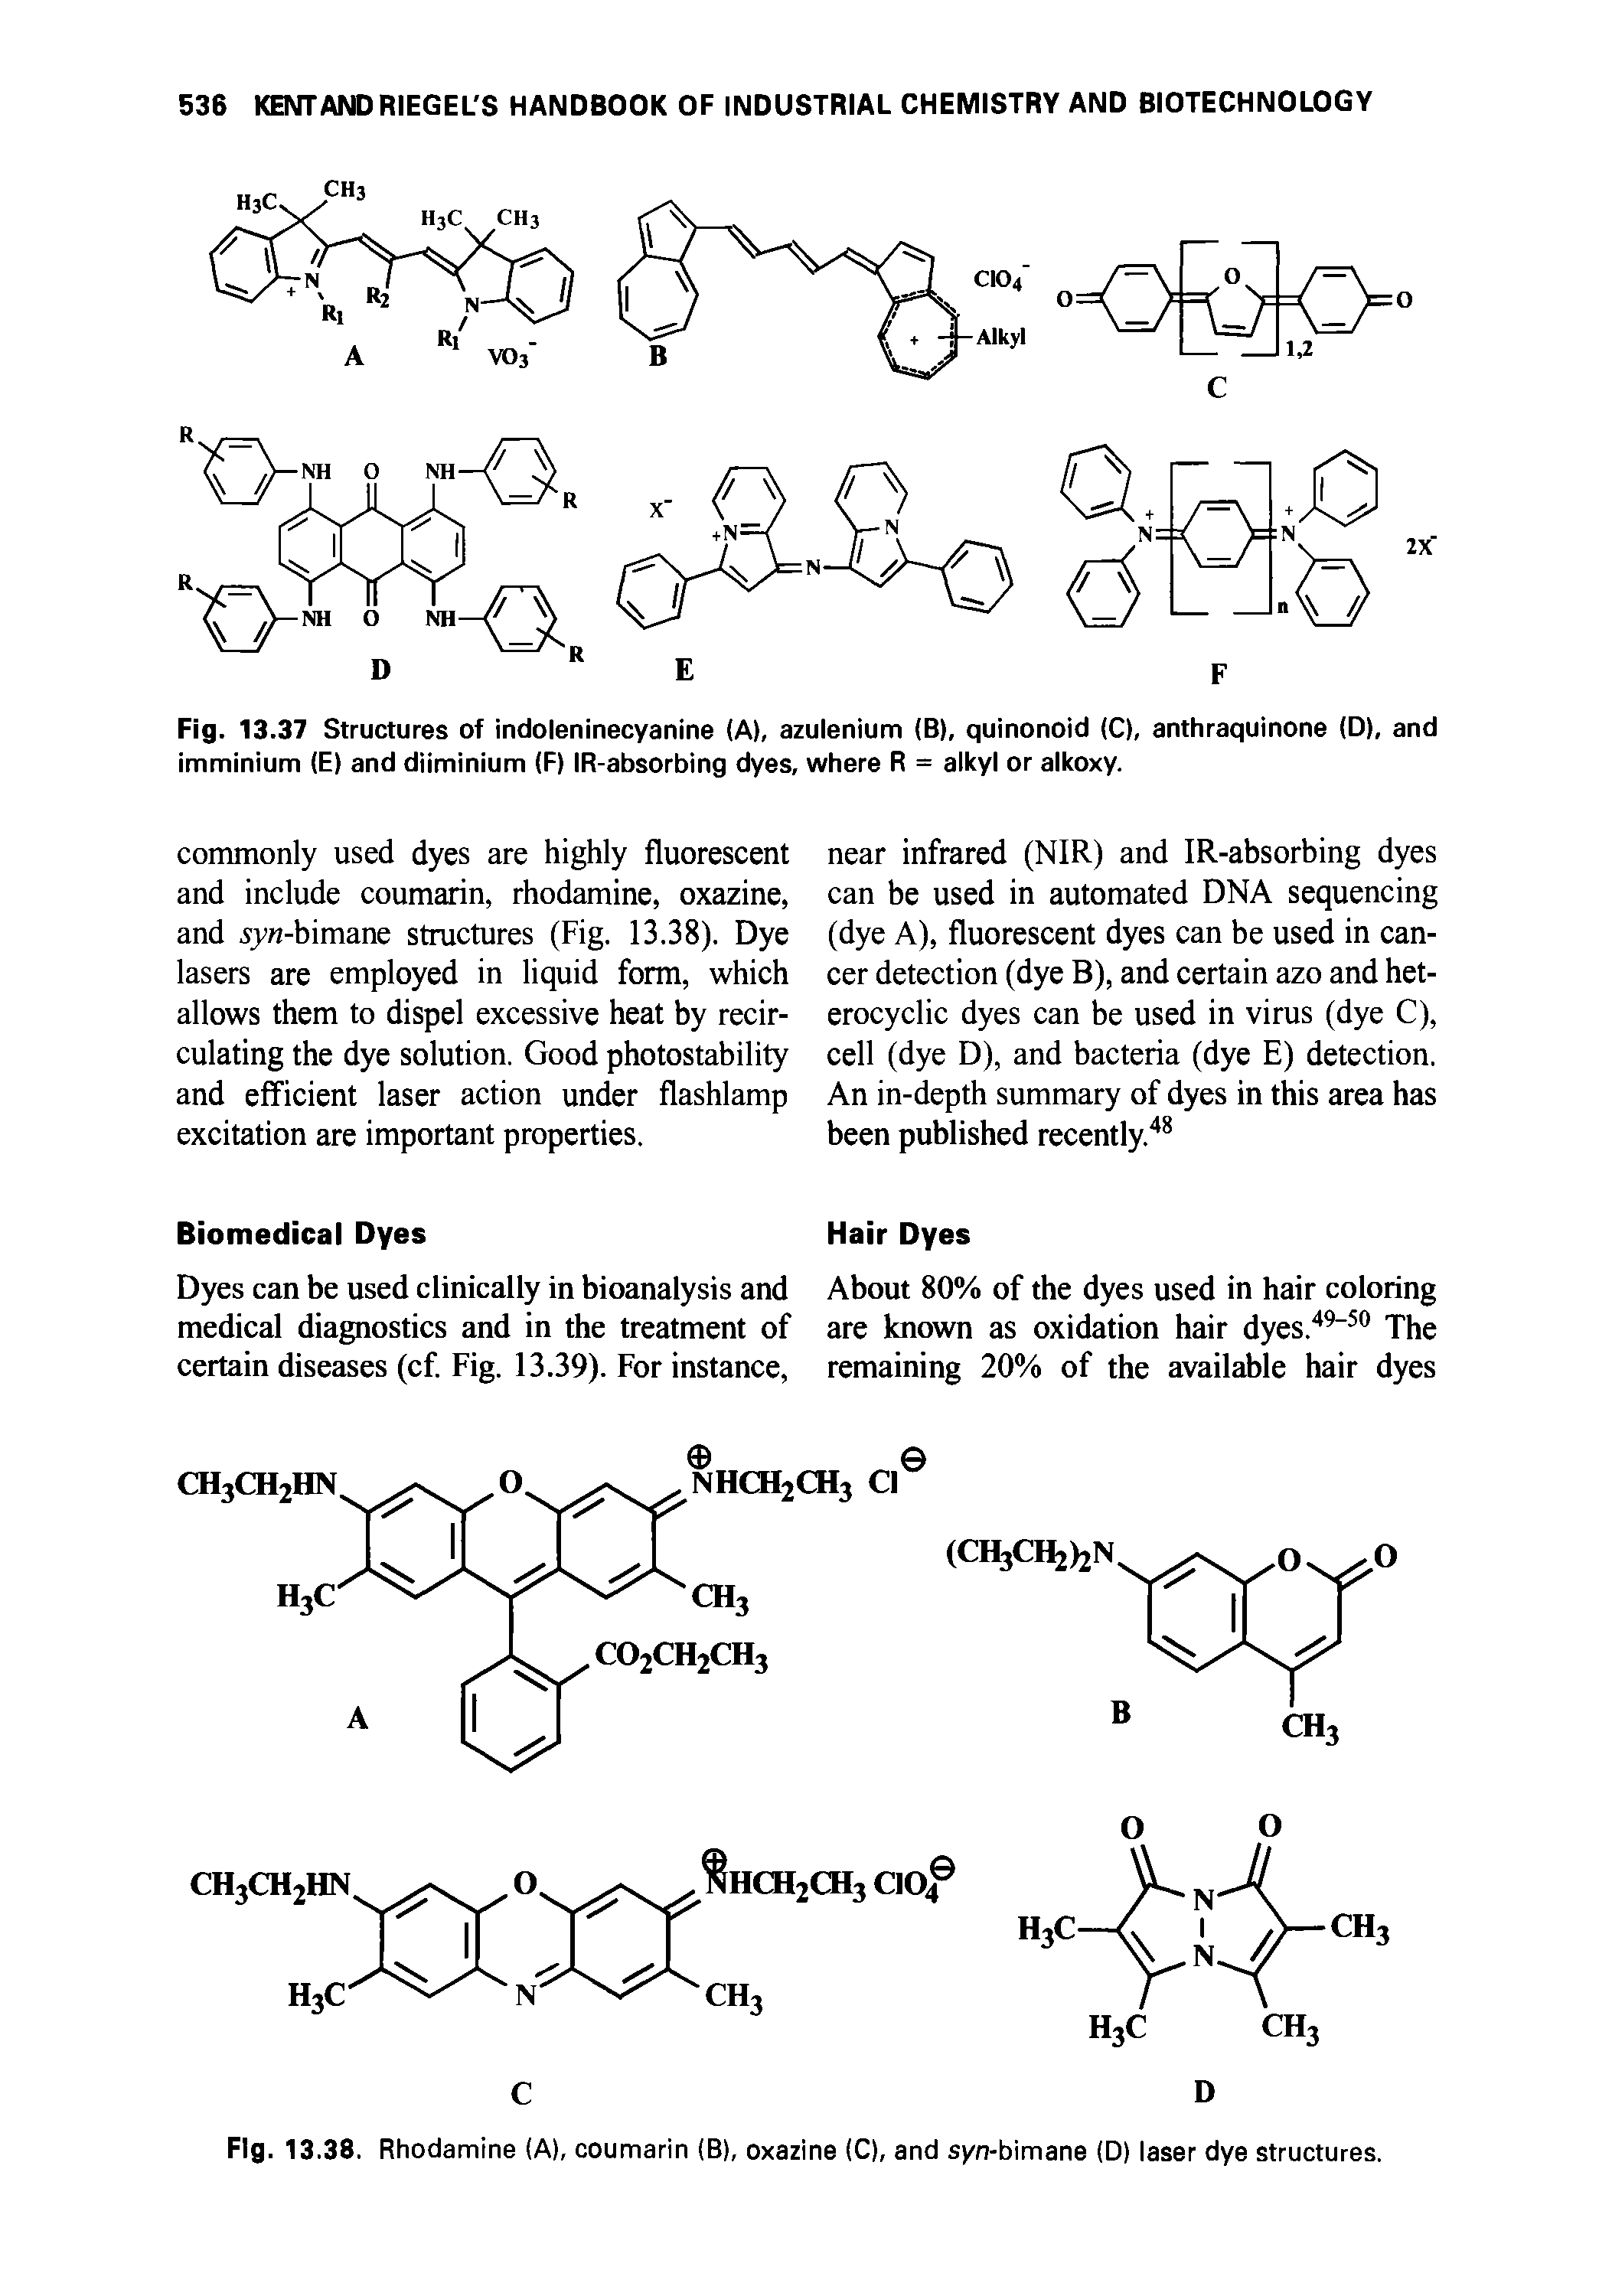 Fig. 13.37 Structures of indoleninecyanine (A), azulenium (B), quinonoid (C), anthraquinone (D), and imminium (E) and diiminium (F) IR-absorbing dyes, where R = alkyl or alkoxy.